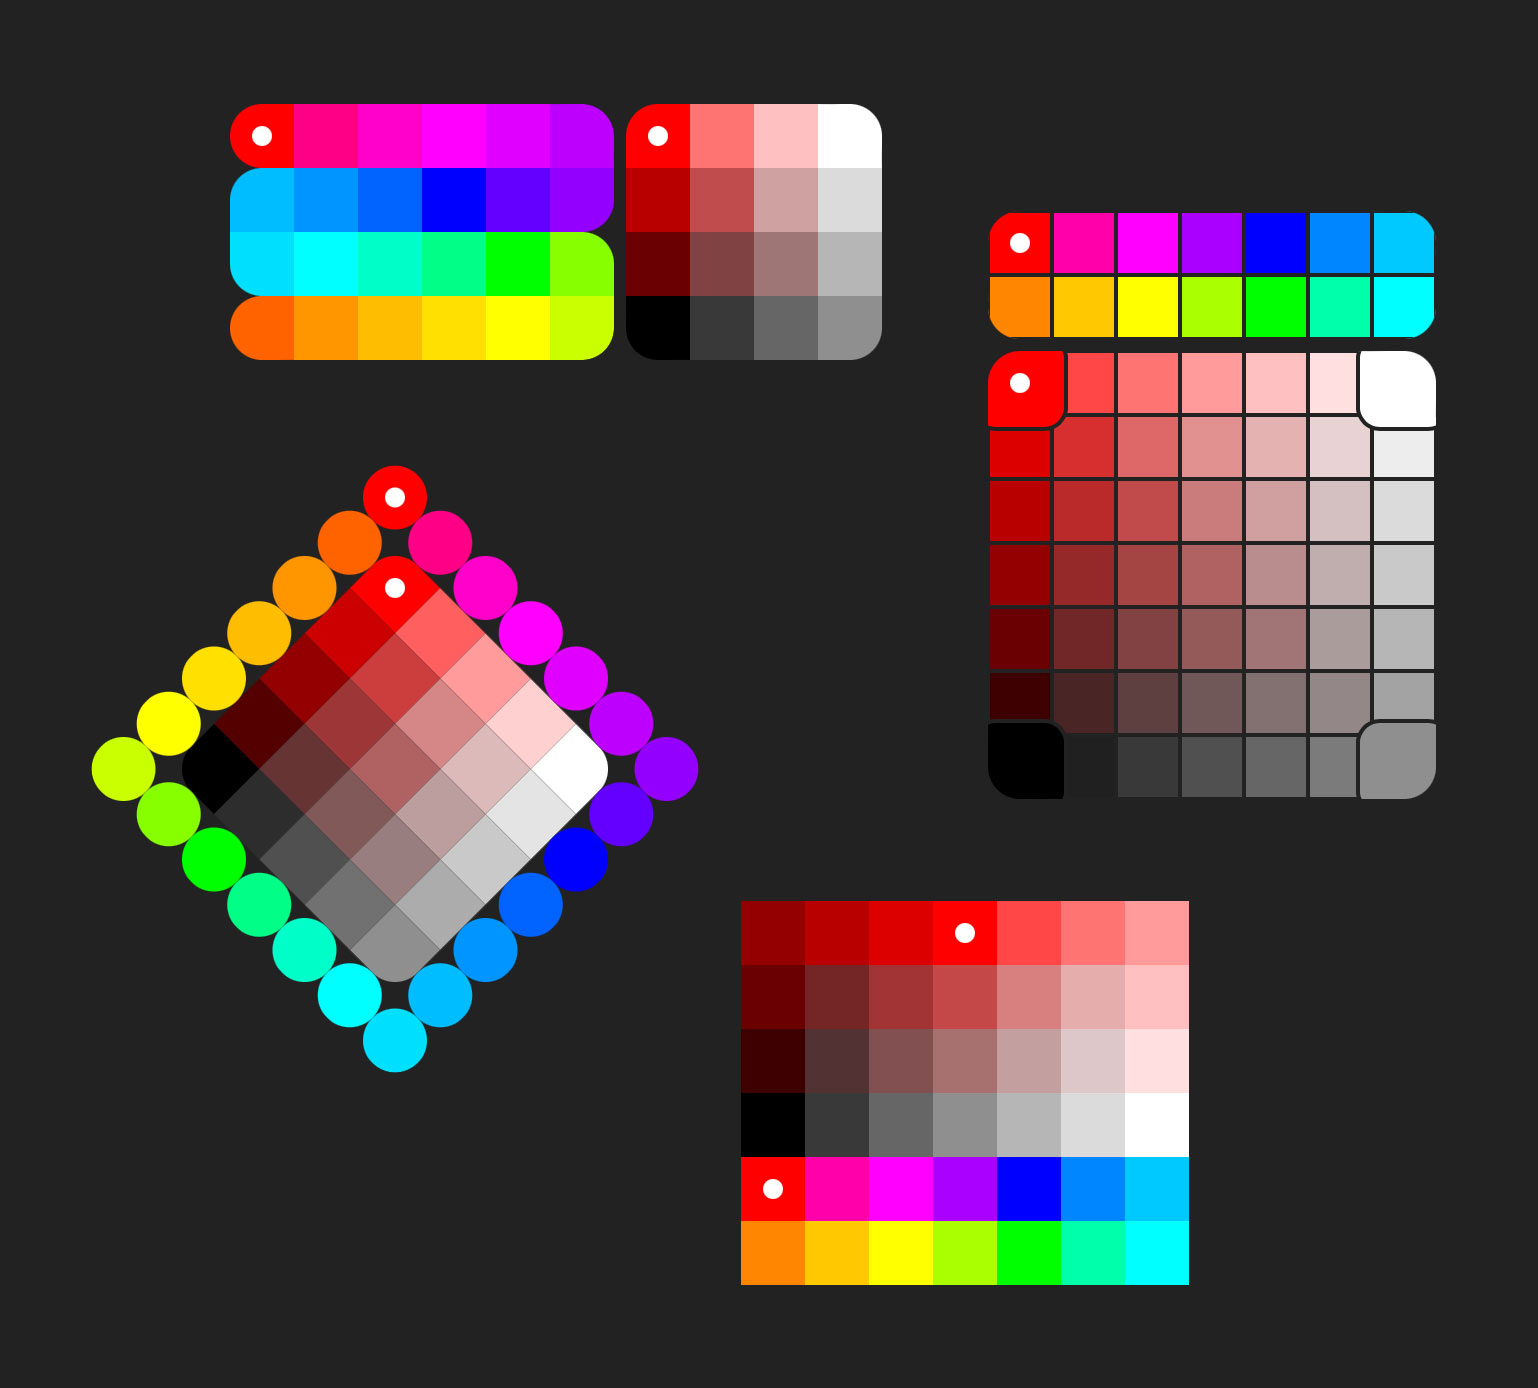 Four variations on color pickers (3 rectangular, 1 diamond) with a tone (saturation and value) selection region plus a hue selector arrayed in a serpentine or loop layout.